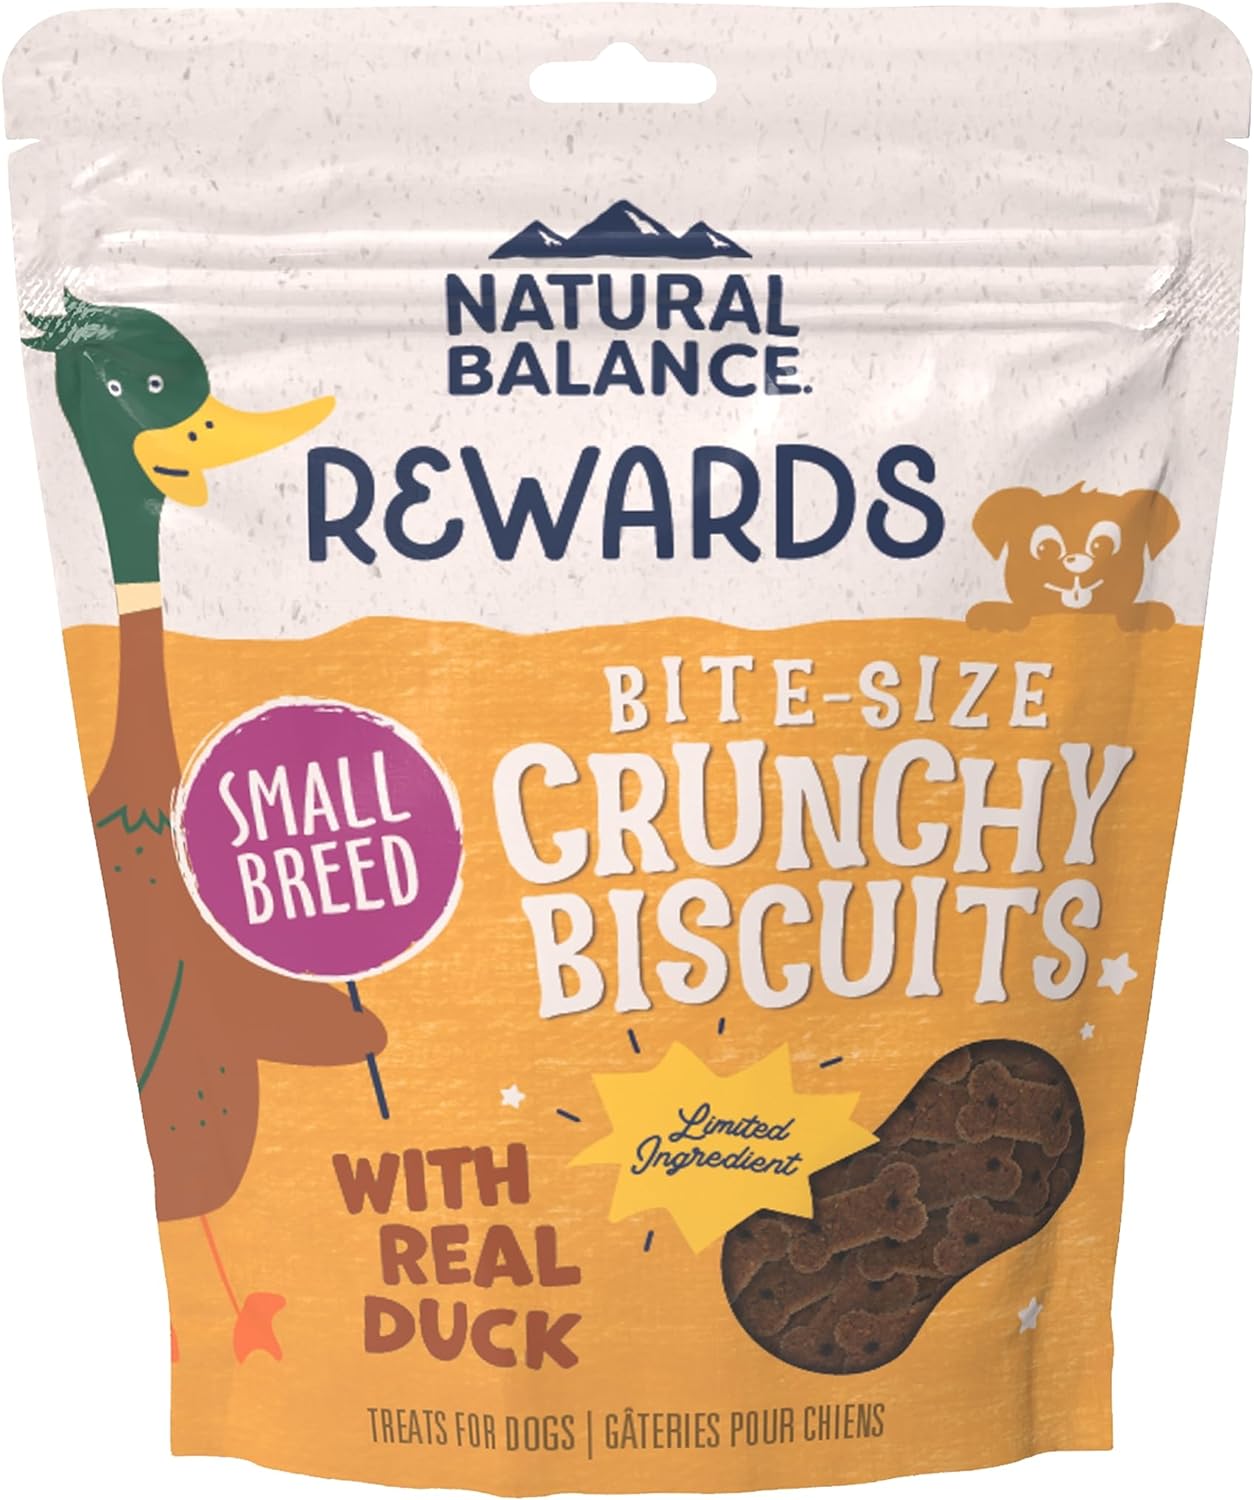 Natural Balance Limited Ingredient Rewards Crunchy Biscuits, Bite-Size Grain-Free Dog Treats for Small-Breed Dogs, Made with Real Duck, 8 Ounce (Pack of 1)